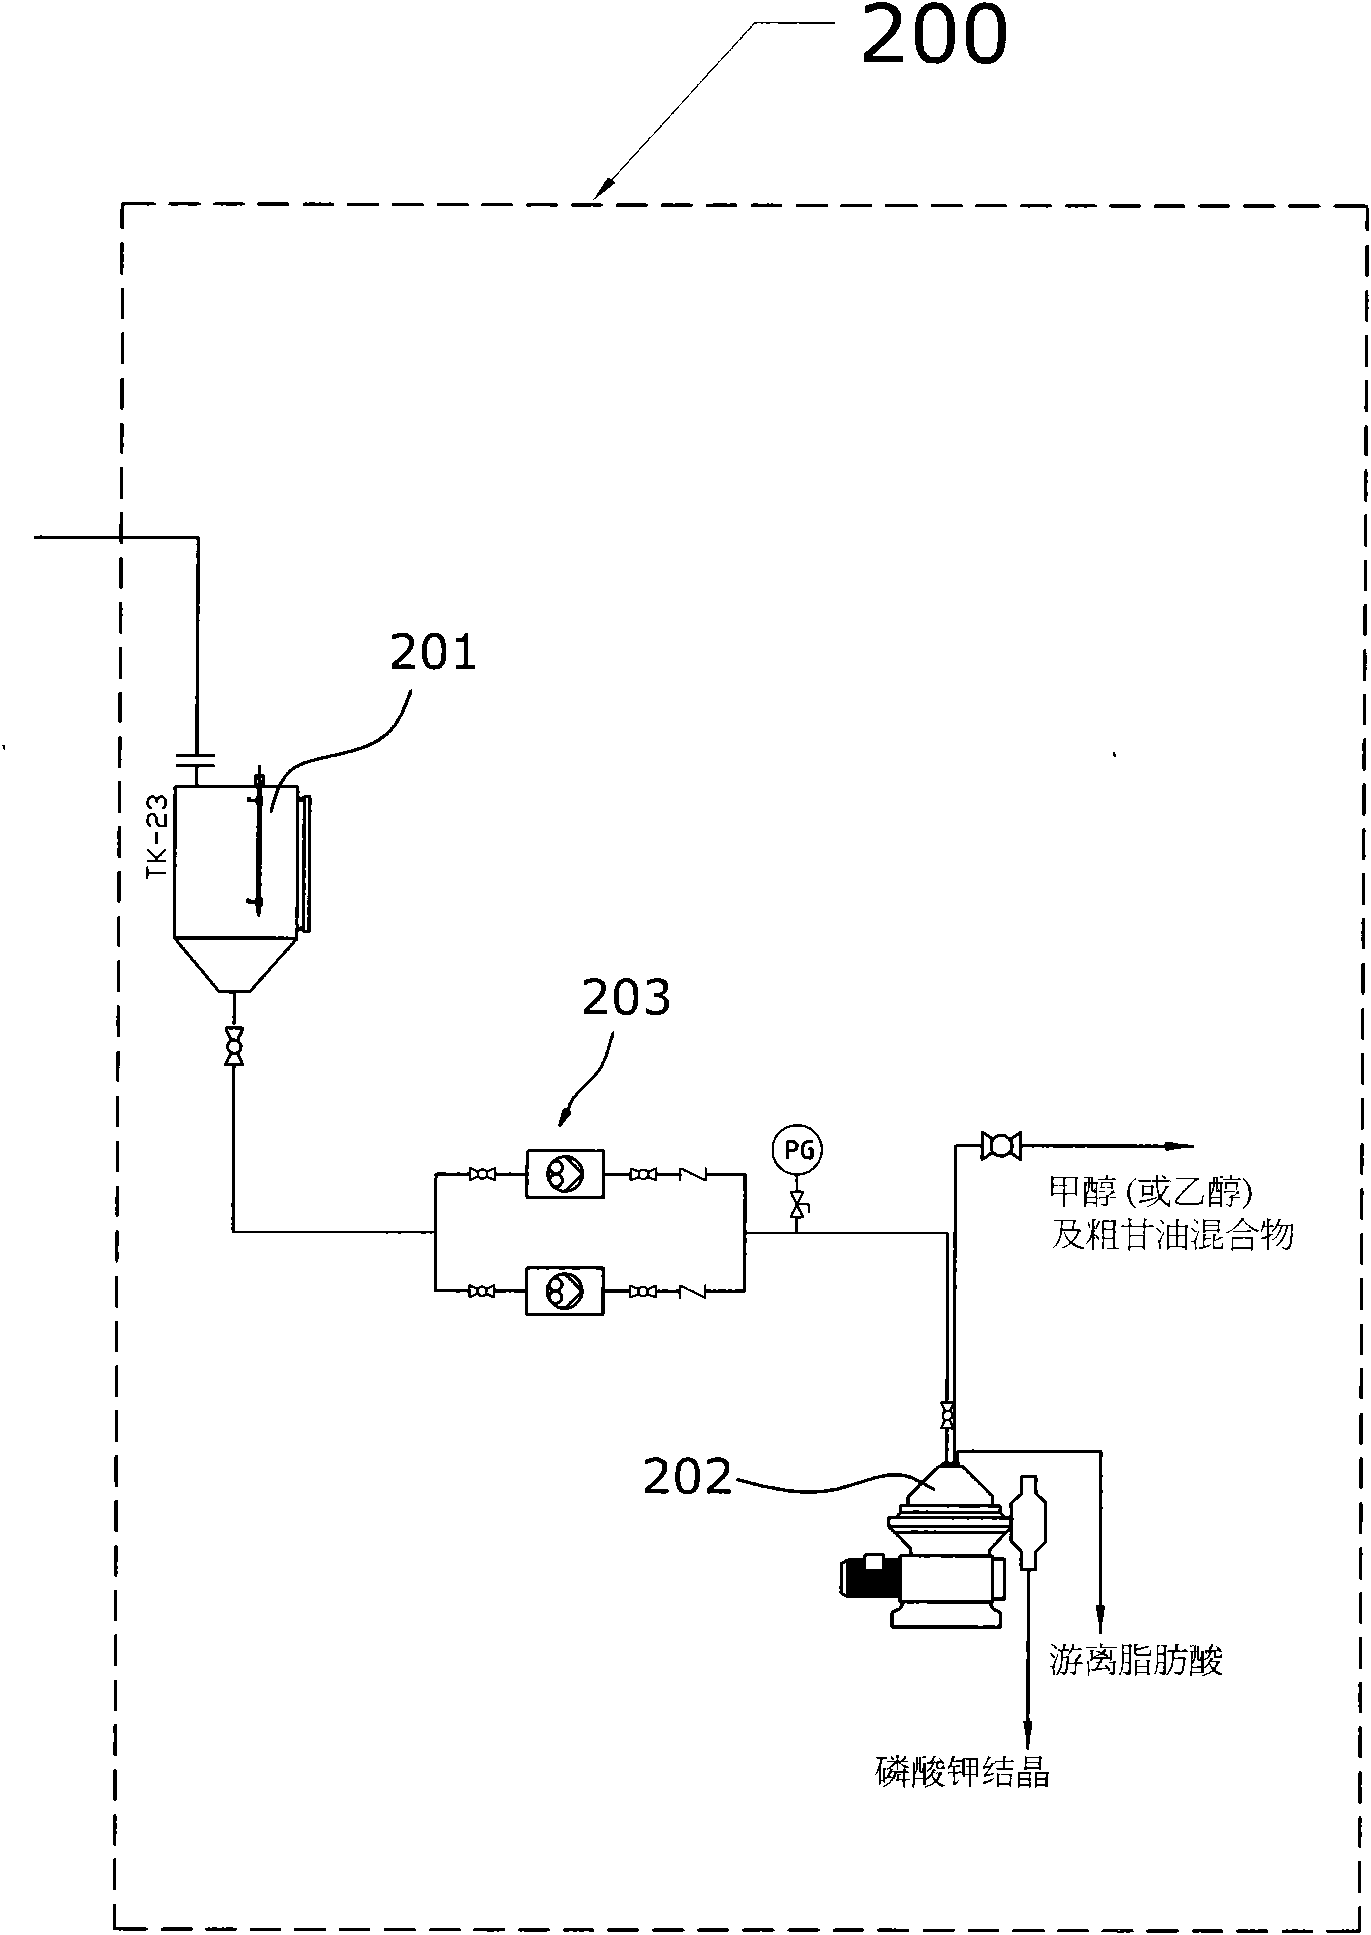 Method for preparing glycerin from byproduct in manufacture procedure of biodiesel